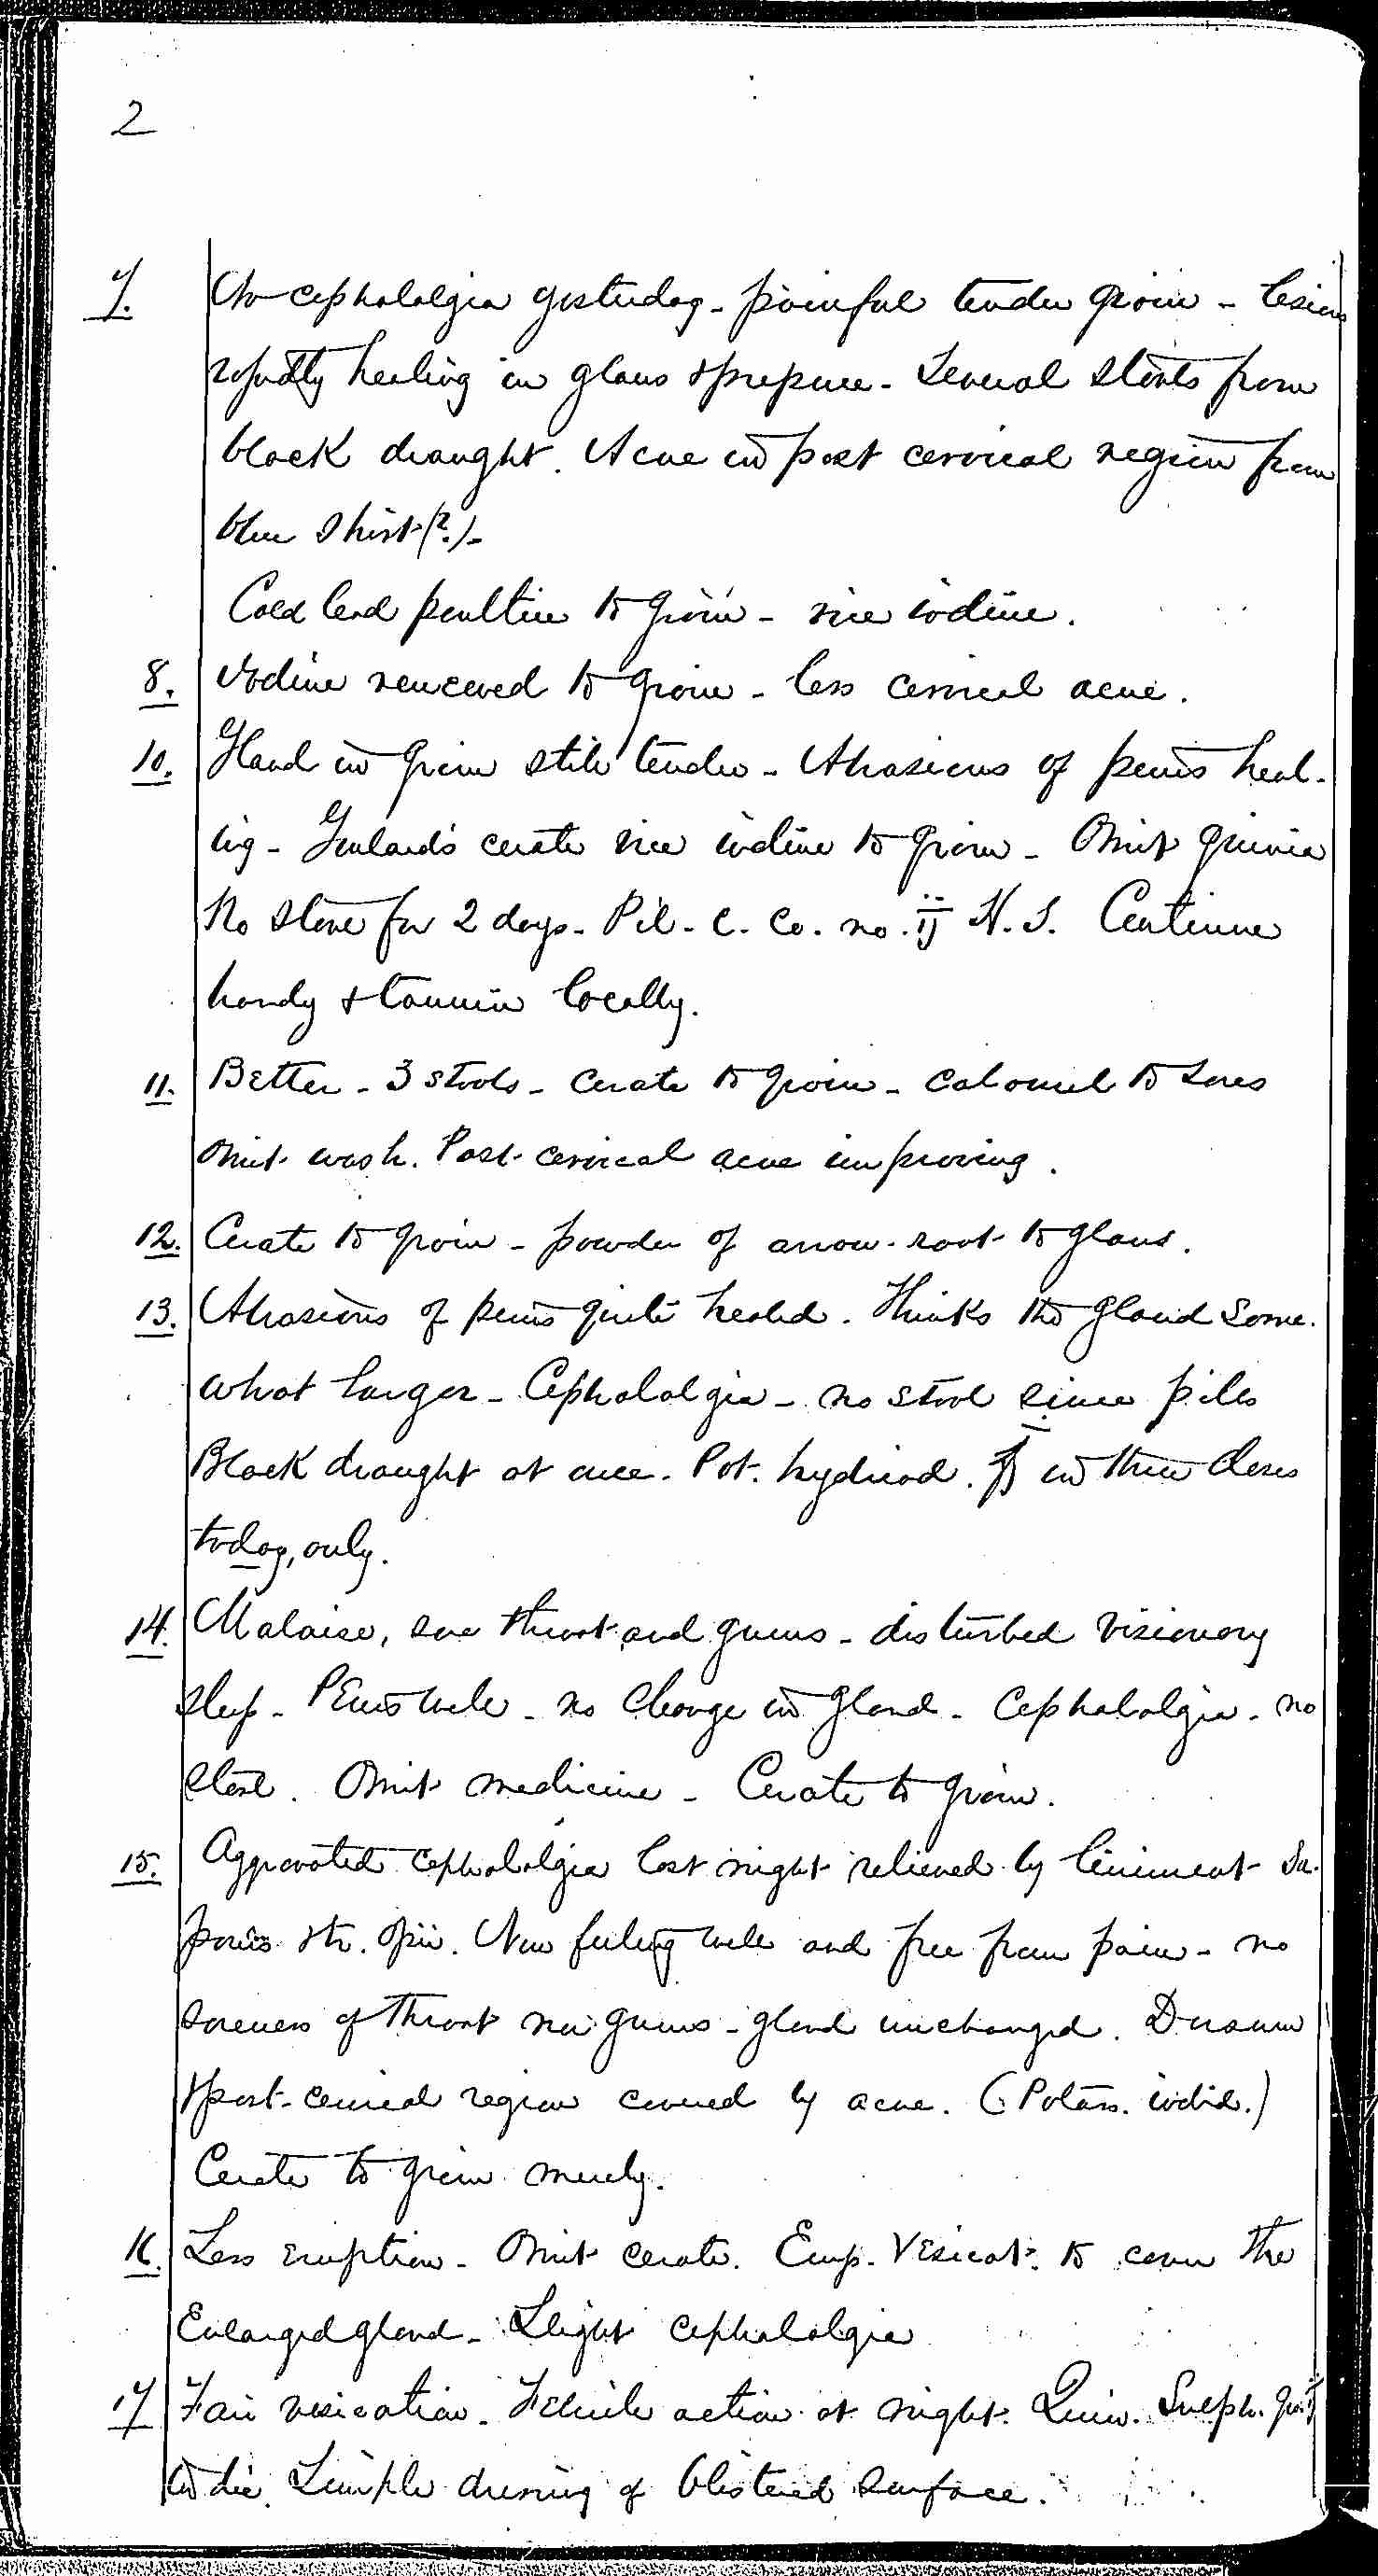 Entry for Eugene Smith (page 2 of 6) in the log Hospital Tickets and Case Papers - Naval Hospital - Washington, D.C. - 1868-69